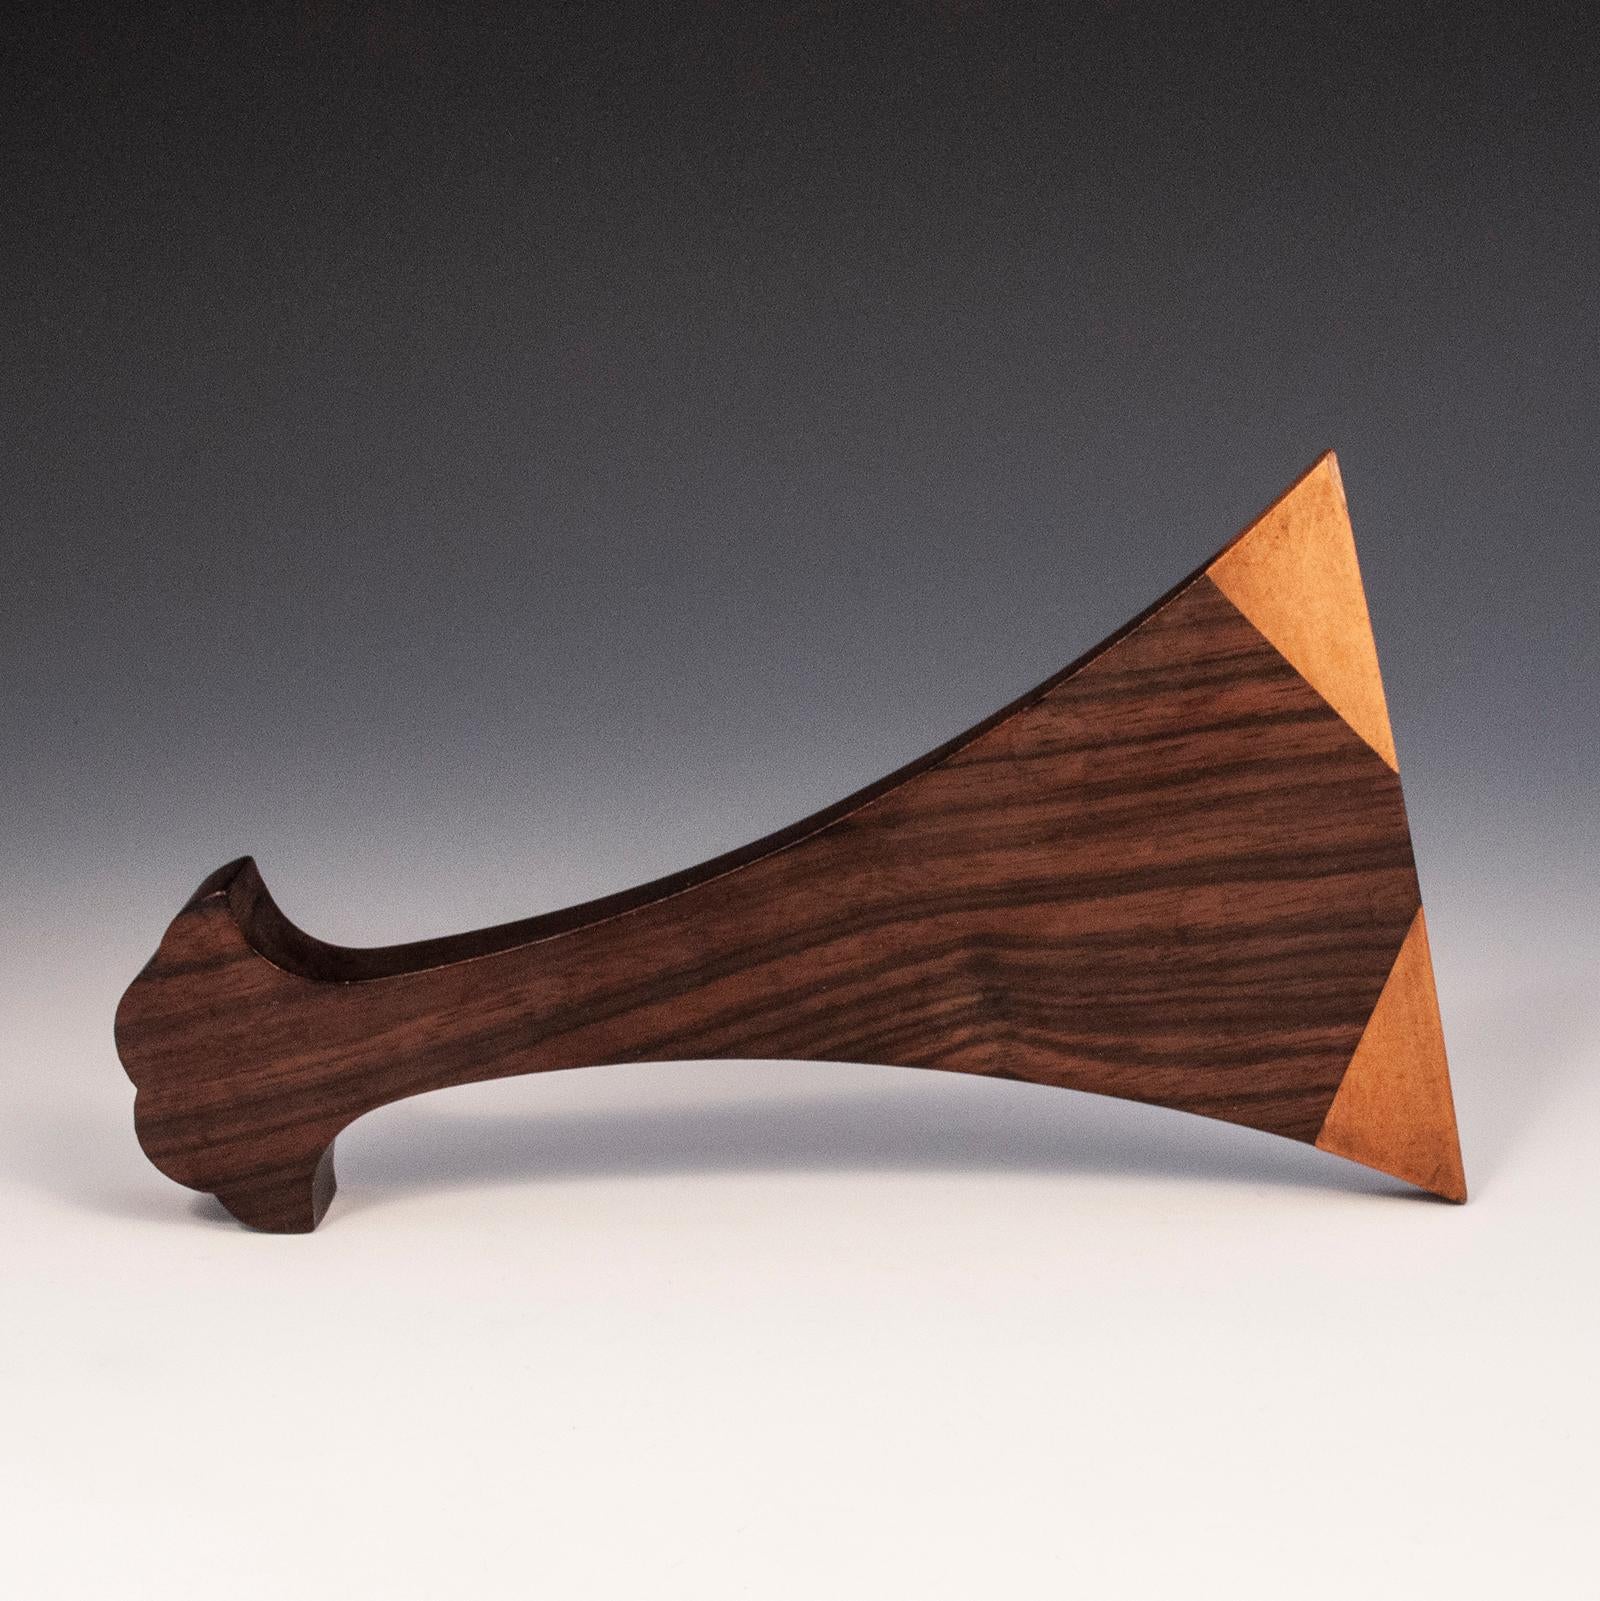 Rosewood Plectrum for Biwa, Japan

A beautiful rosewood plectrum used in plucking the strings of a chikuzen-biwa, which is a 4-5 string fretted lute used traditionally for narrative story-telling. The tips are made of notched boxwood, and some